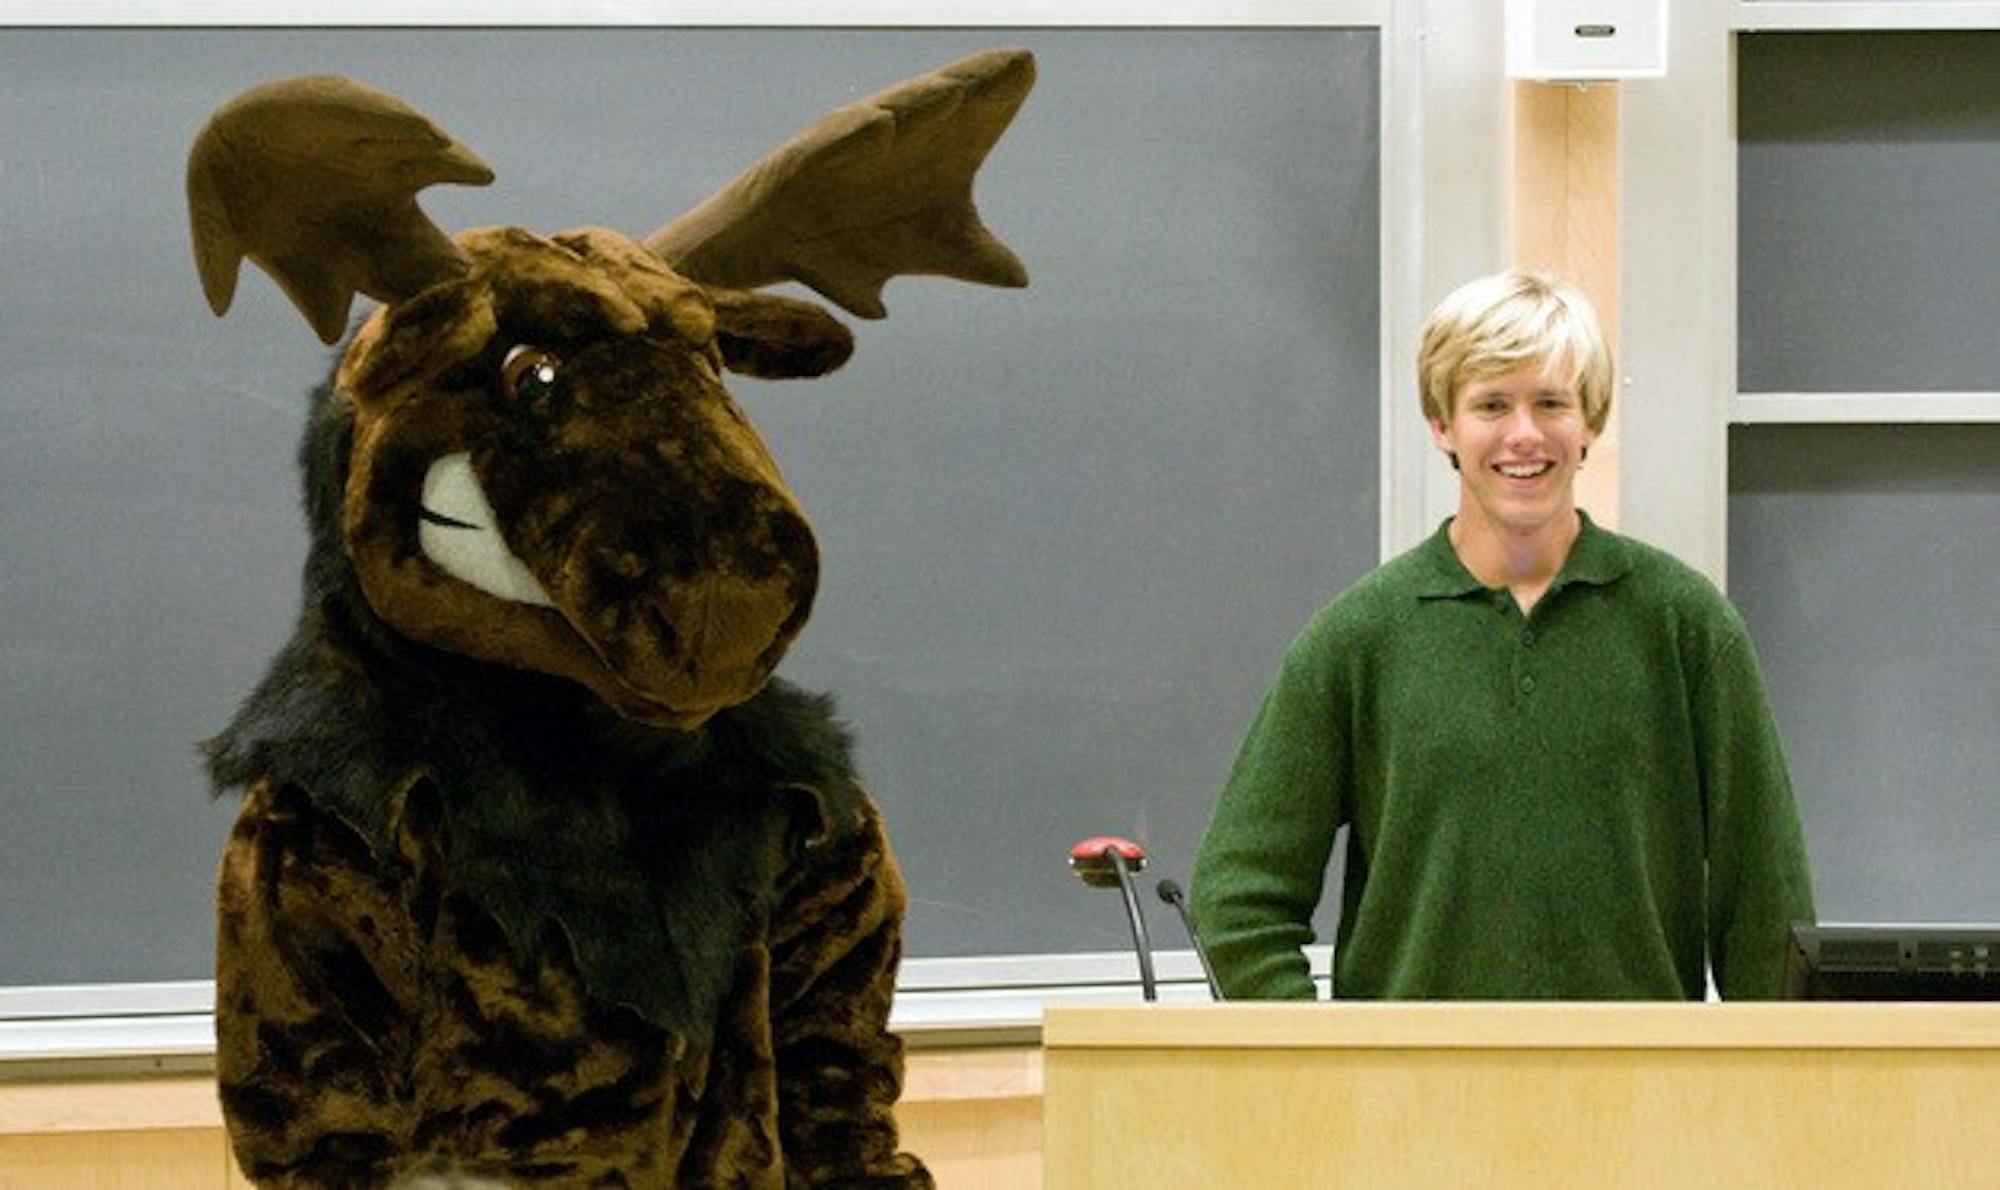 The Dartmoose, who made a surprise visit to Tuesday's Assembly meeting, experienceddifficulty seeing and had to be escorted up and down the stairs.